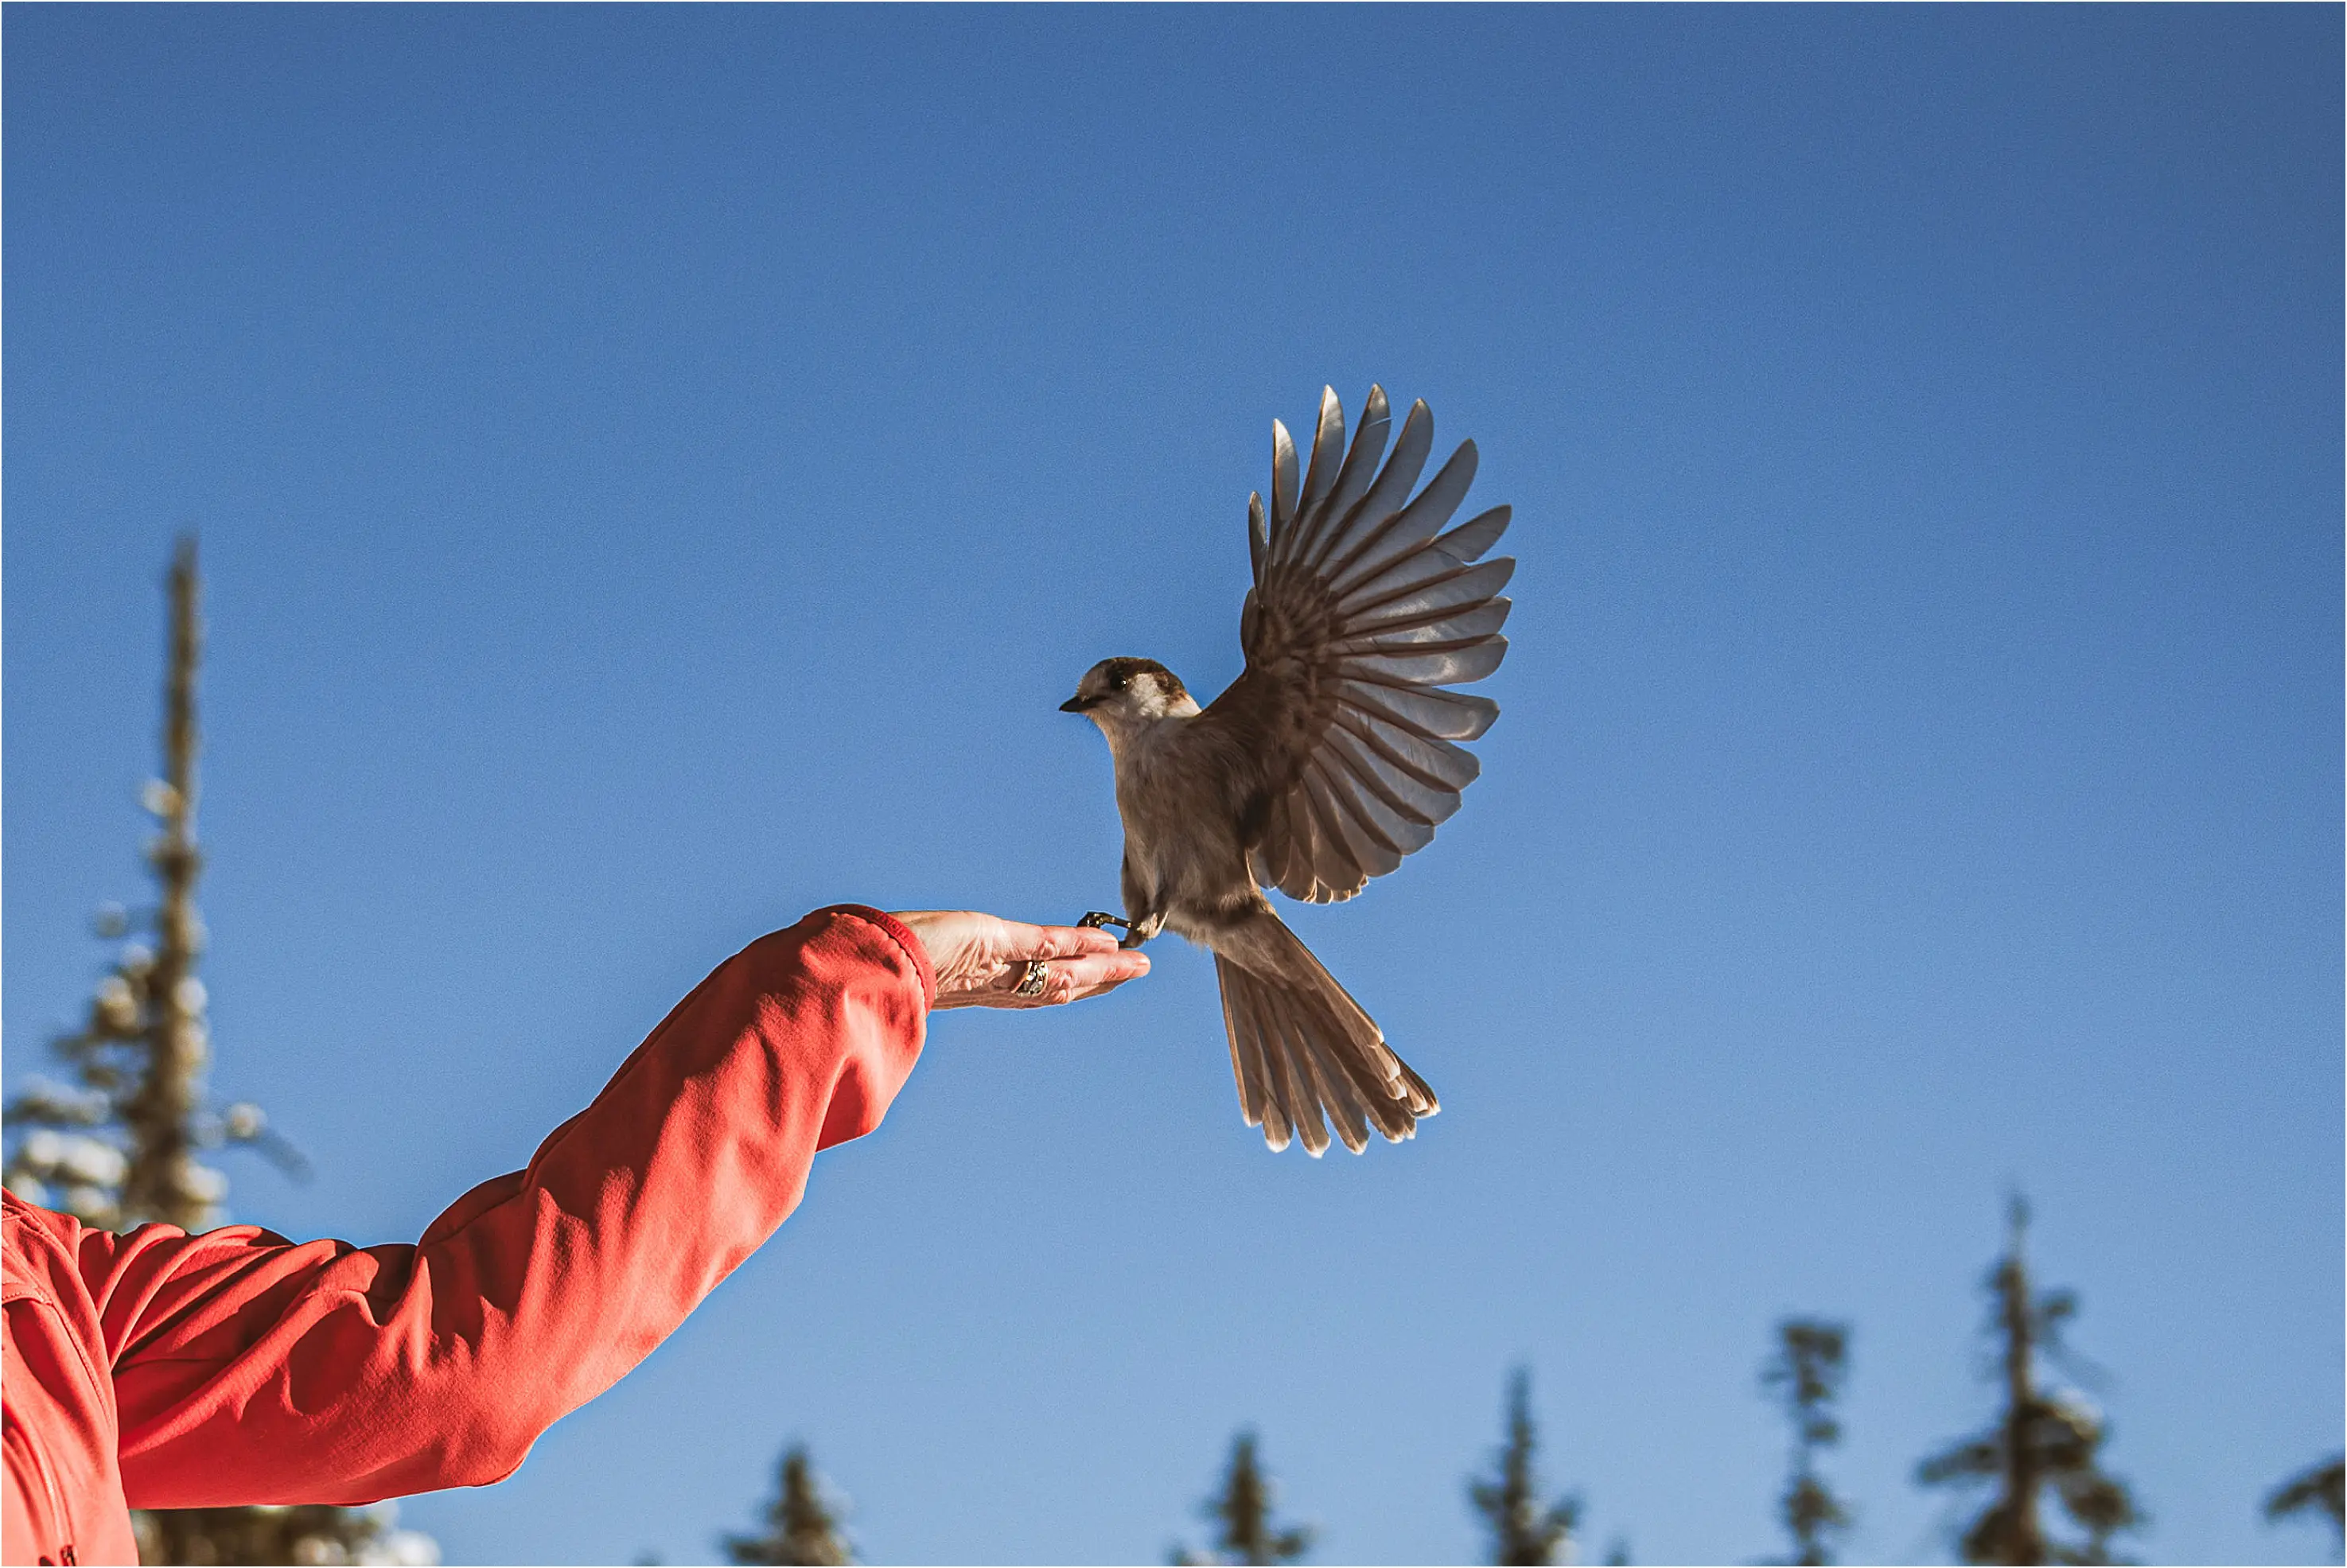 A Gray Jay lands on a girls hand to grab a treat